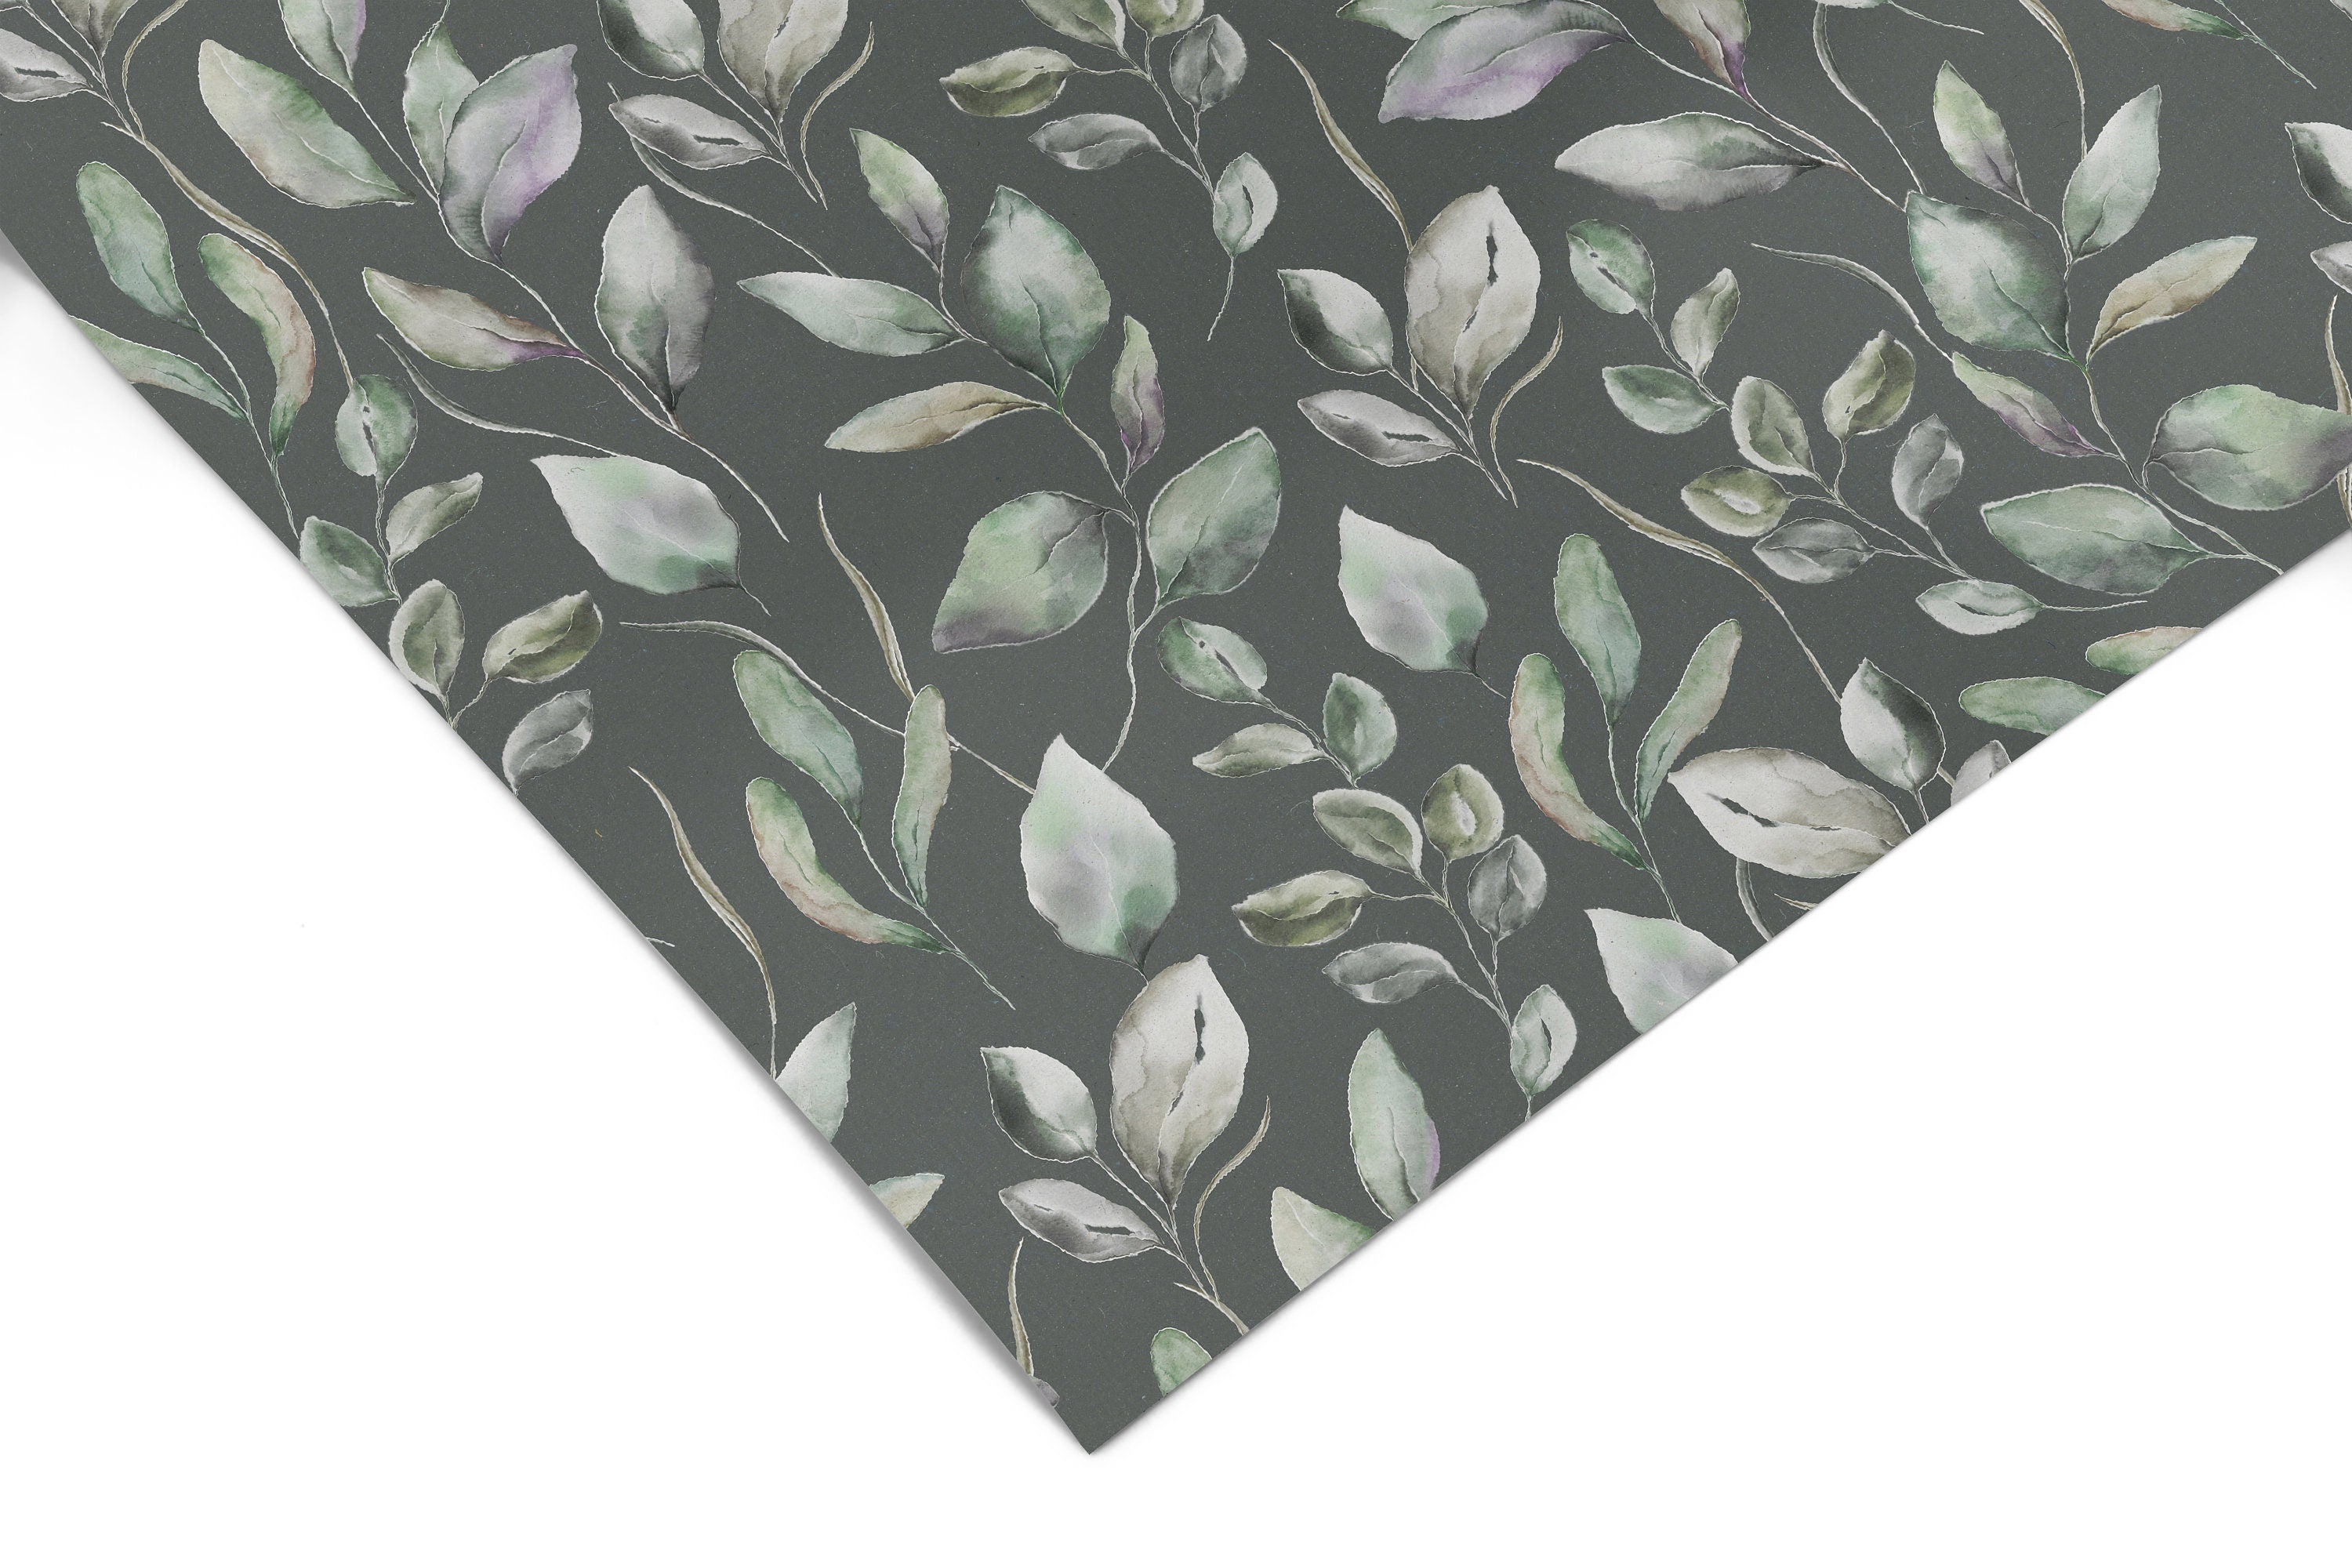 Green Leaf Foliage Contact Paper | Peel And Stick Wallpaper | Removable Wallpaper | Shelf Liner | Drawer Liner | Peel and Stick Paper 613 - JamesAndColors